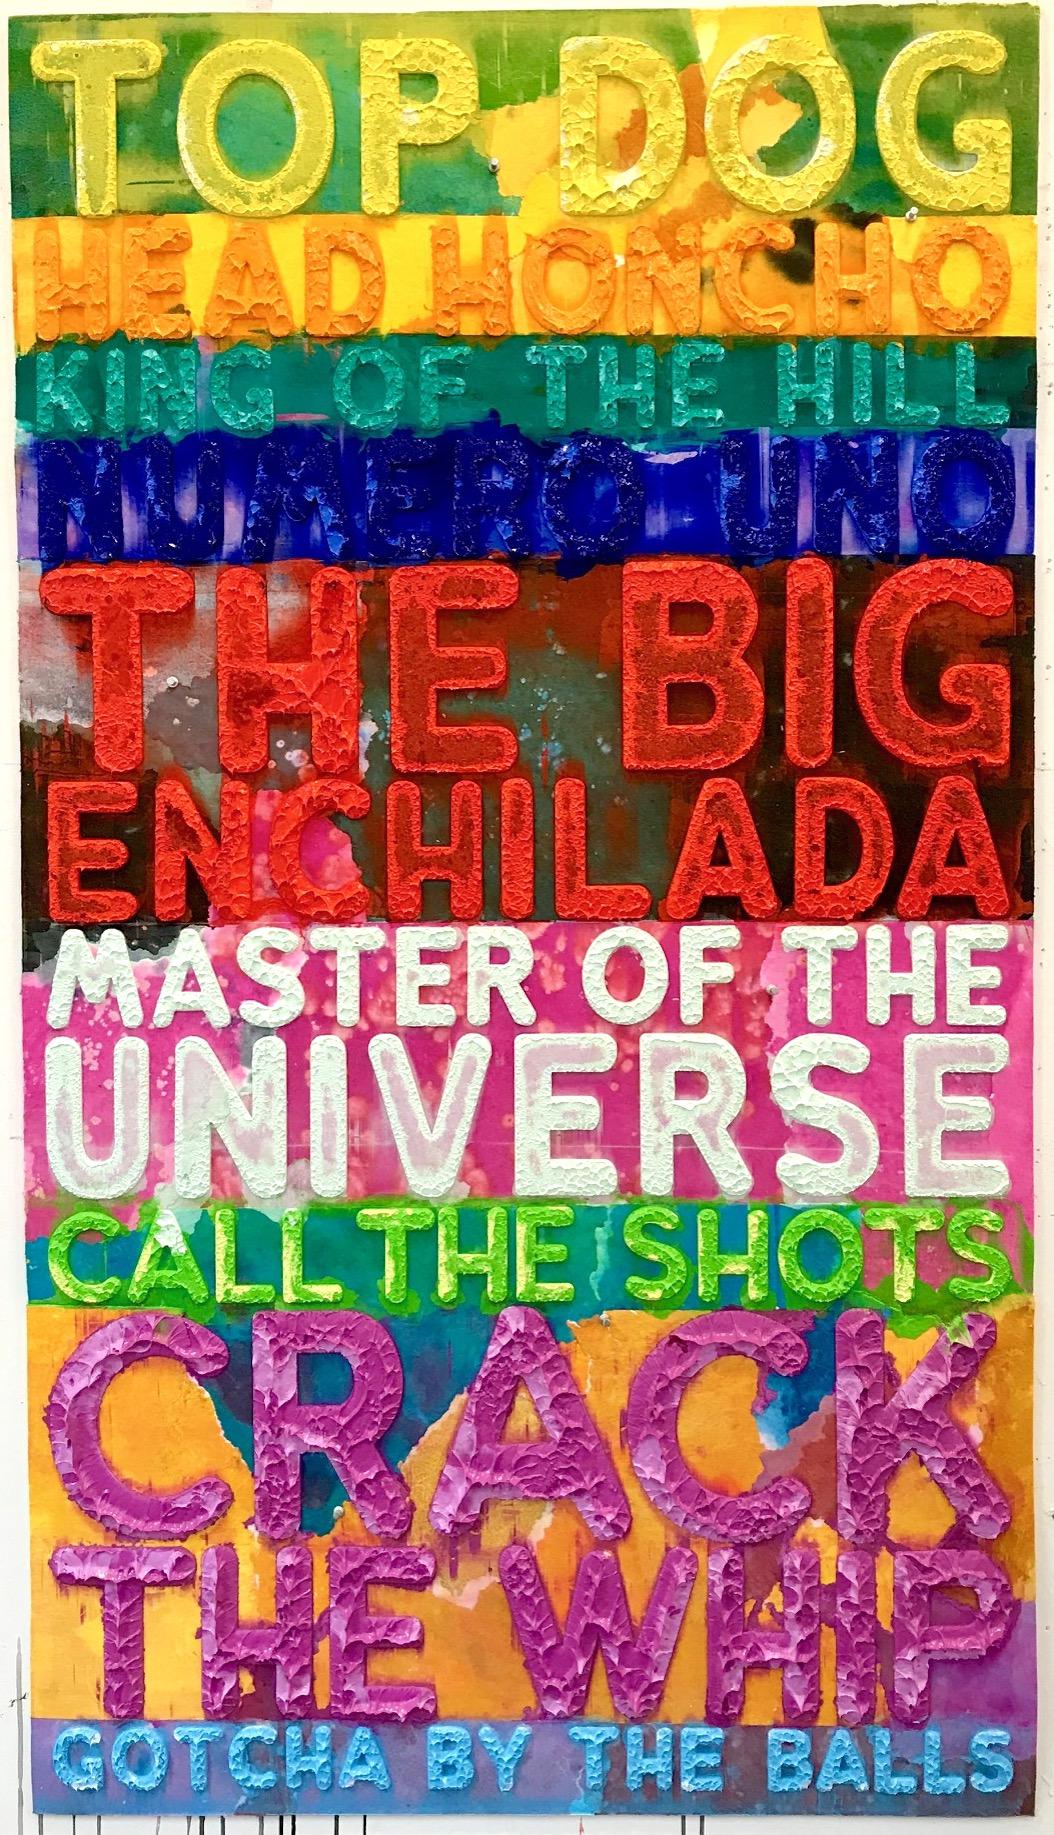 Top Dog - Painting by Mel Bochner